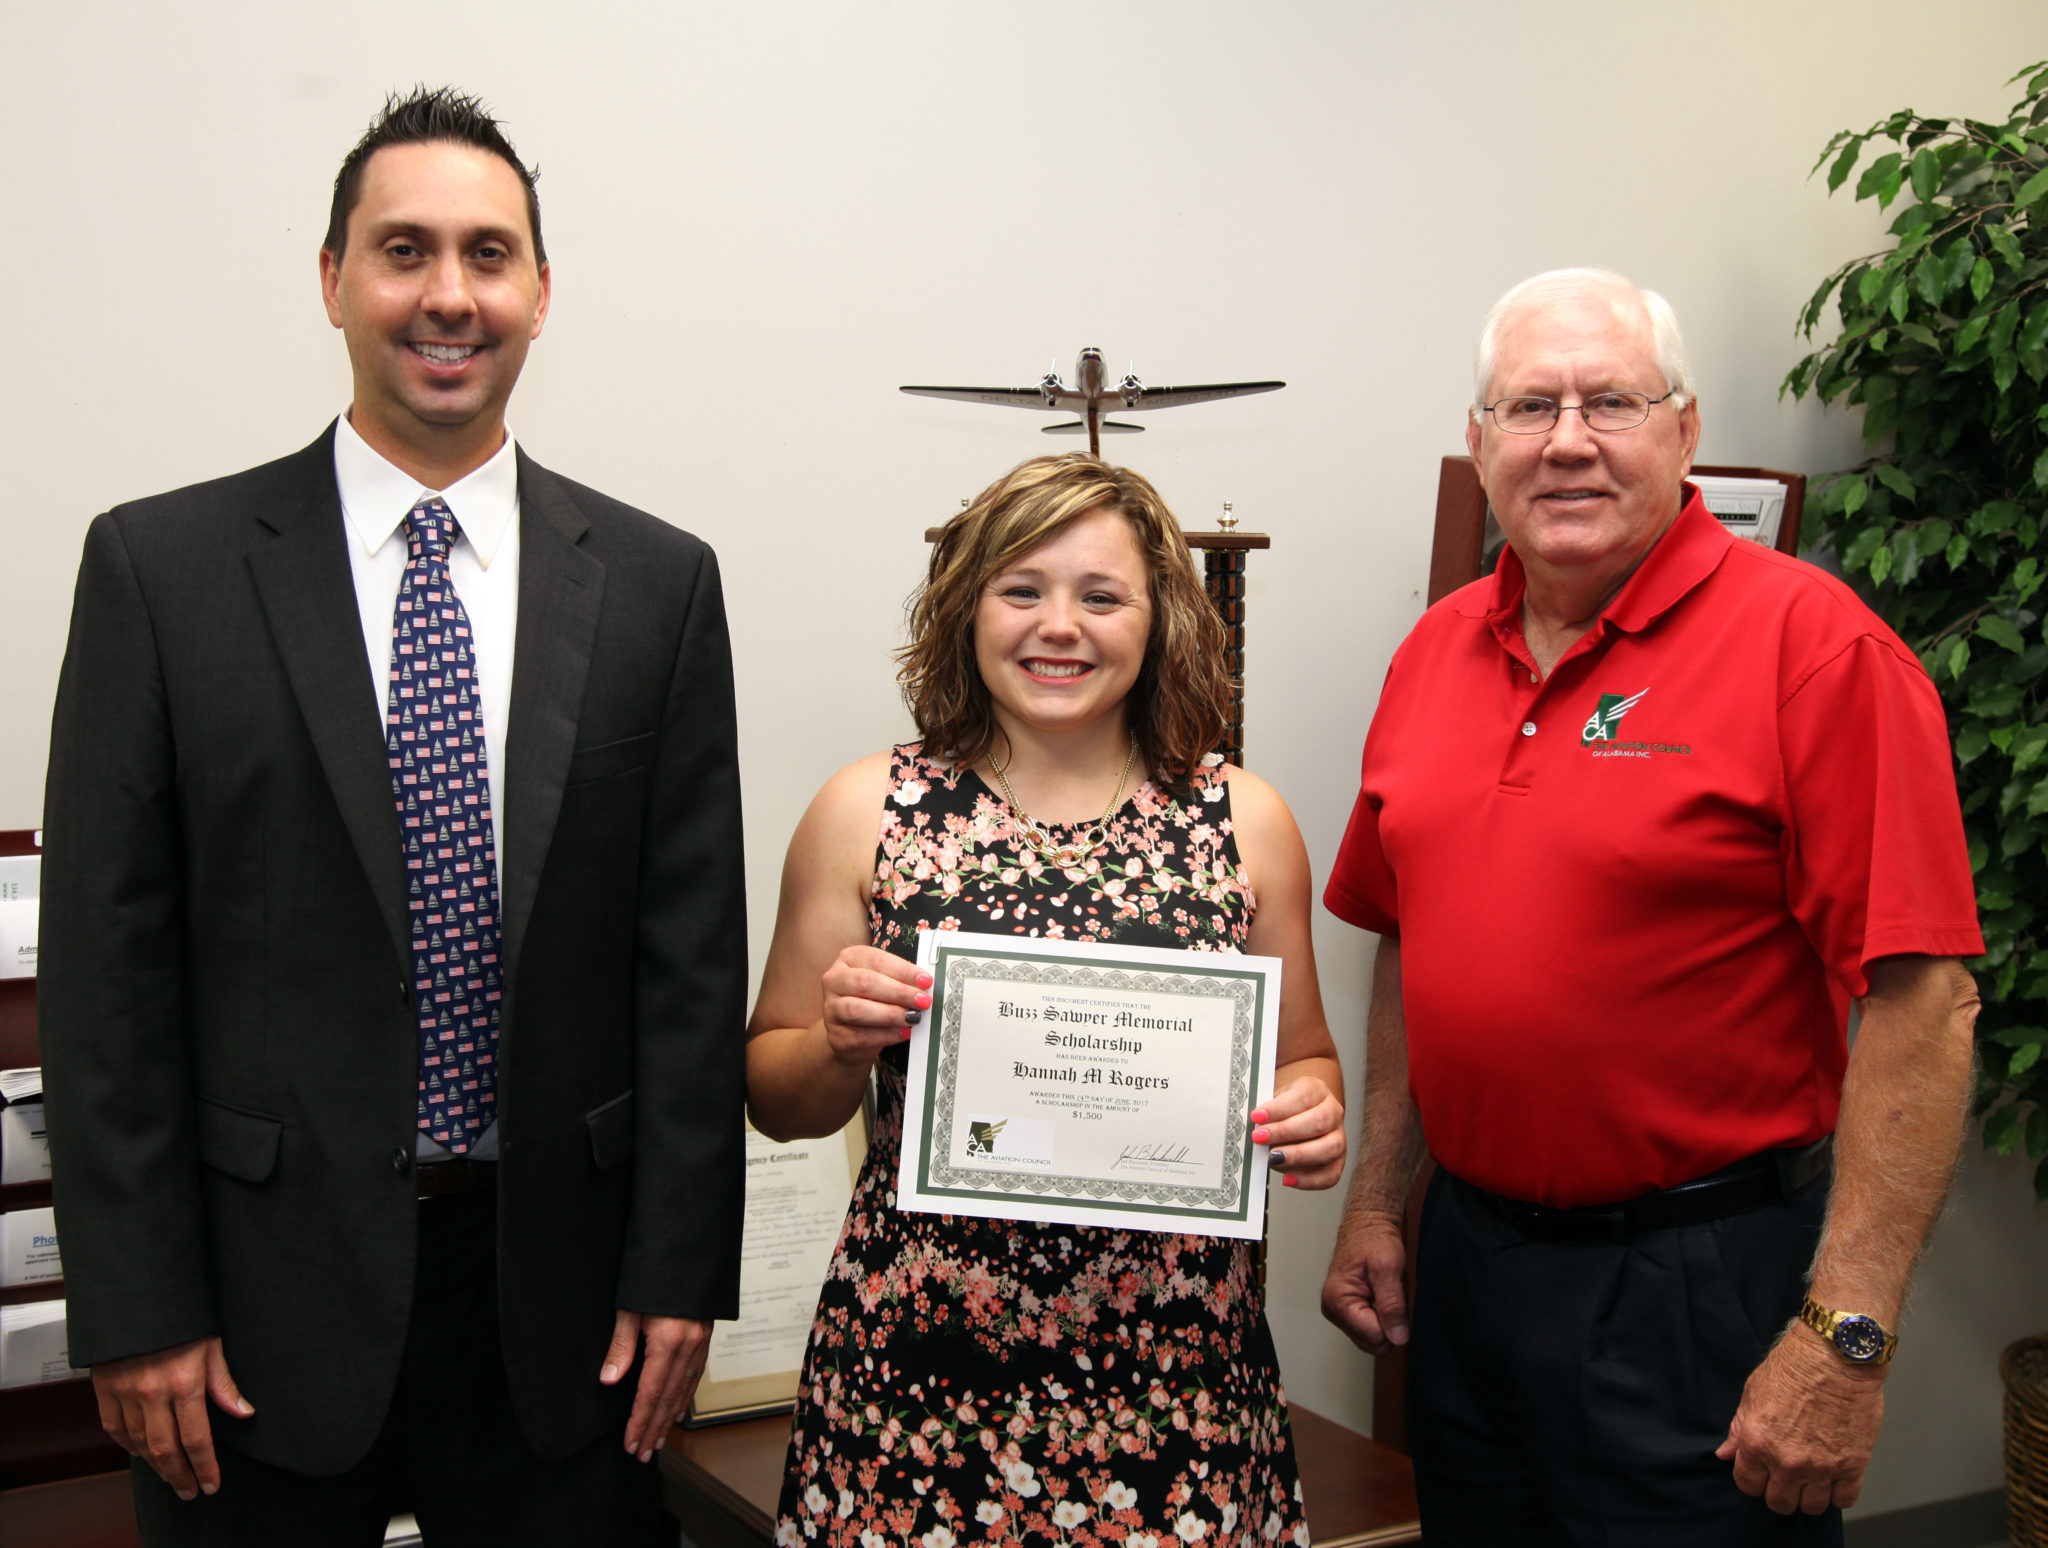 First Annual Buzz Sawyer Memorial Scholarship awarded to AAC Student